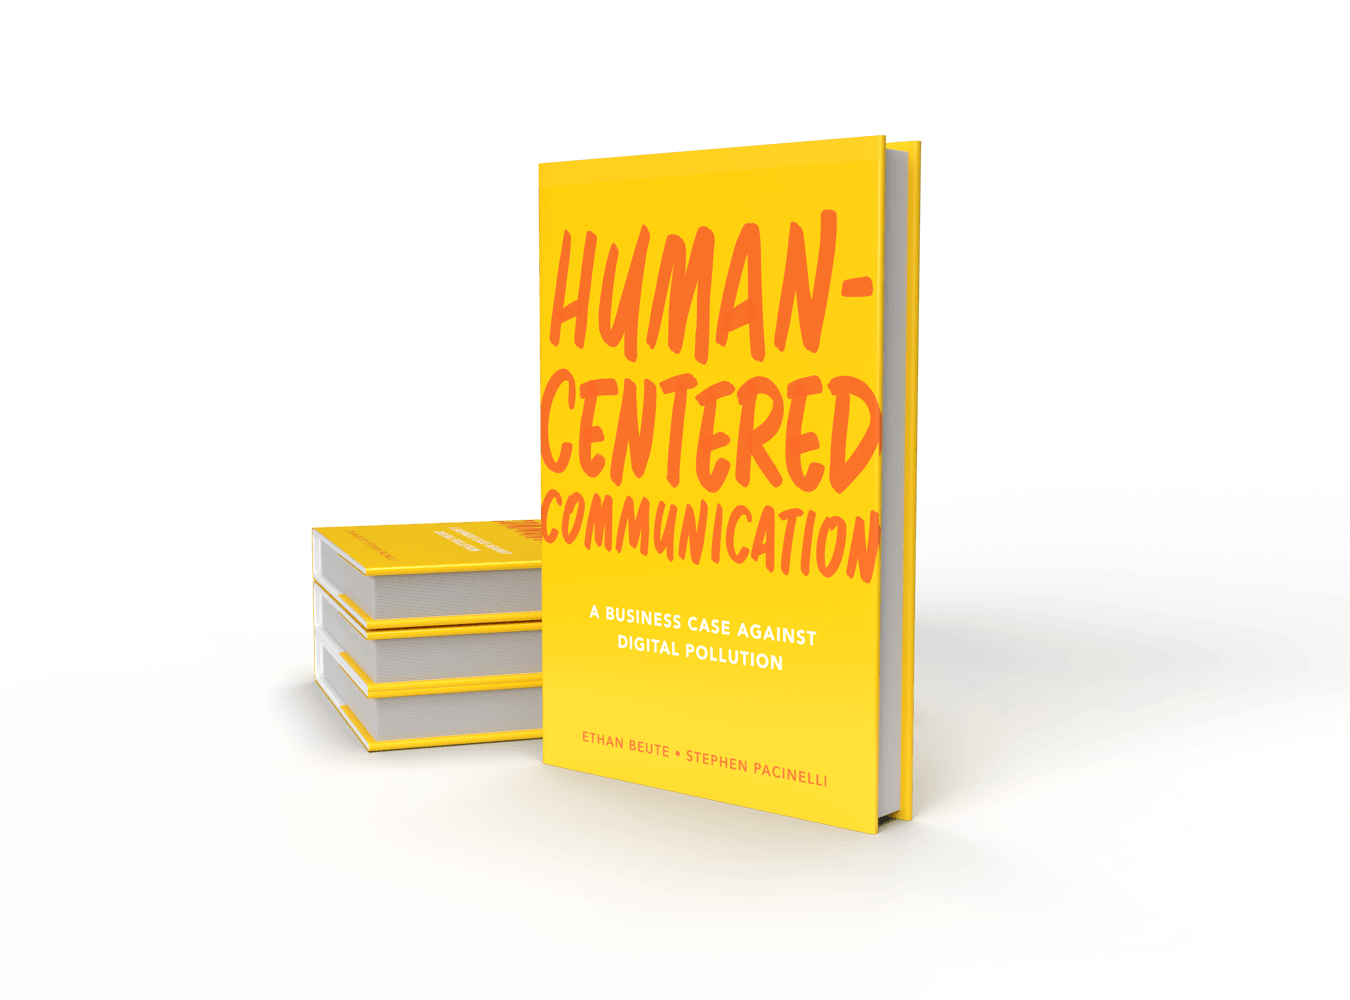 Human-Centered Communication, A Business Case Against Digital Pollution, Fast Company Press, BombBomb, Ethan Beute, Stephen Pacinelli, new book, business book, nonfiction book, visual communication, video communication, virtual communication, digital communication